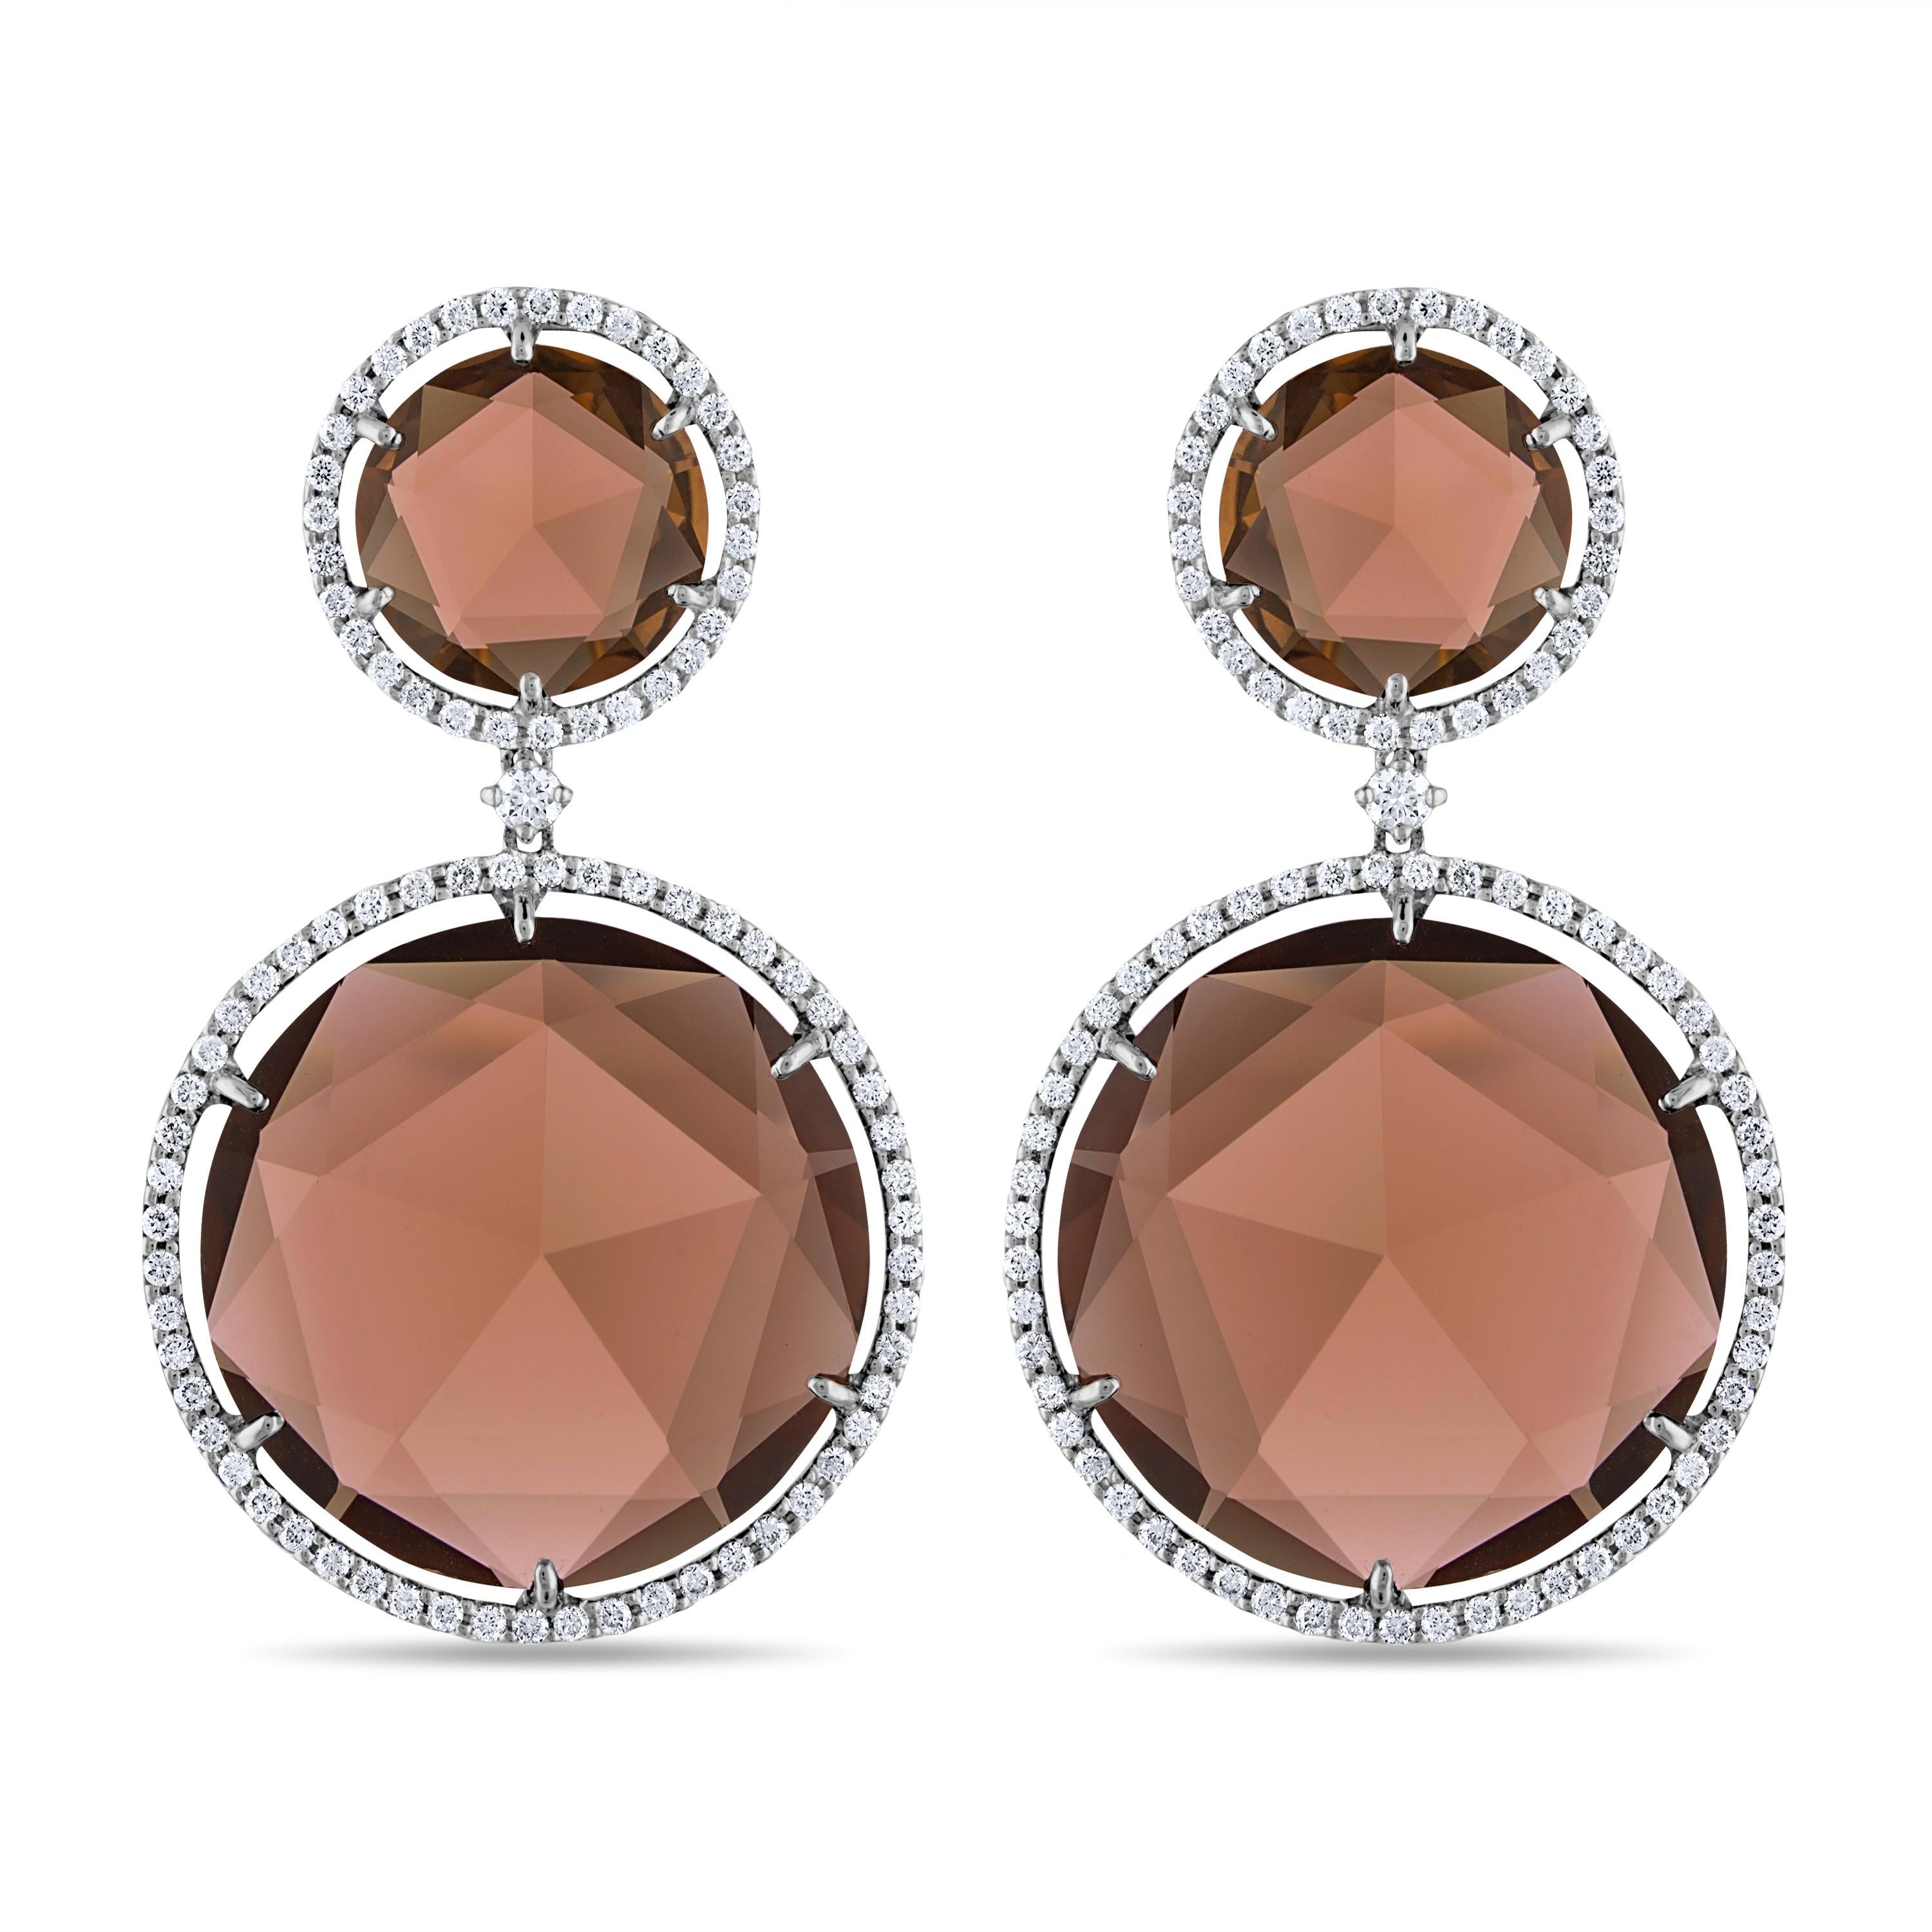 53 Carat Natural Round Rose-Cut Smoky Quartz and White Diamond Gold Earrings:

A stunning pair of earrings, it features 4 round rose-cut natural smoky quartz weighing 53 carat surrounded by white round-brilliant cut diamonds weighing 1.65 carat. The